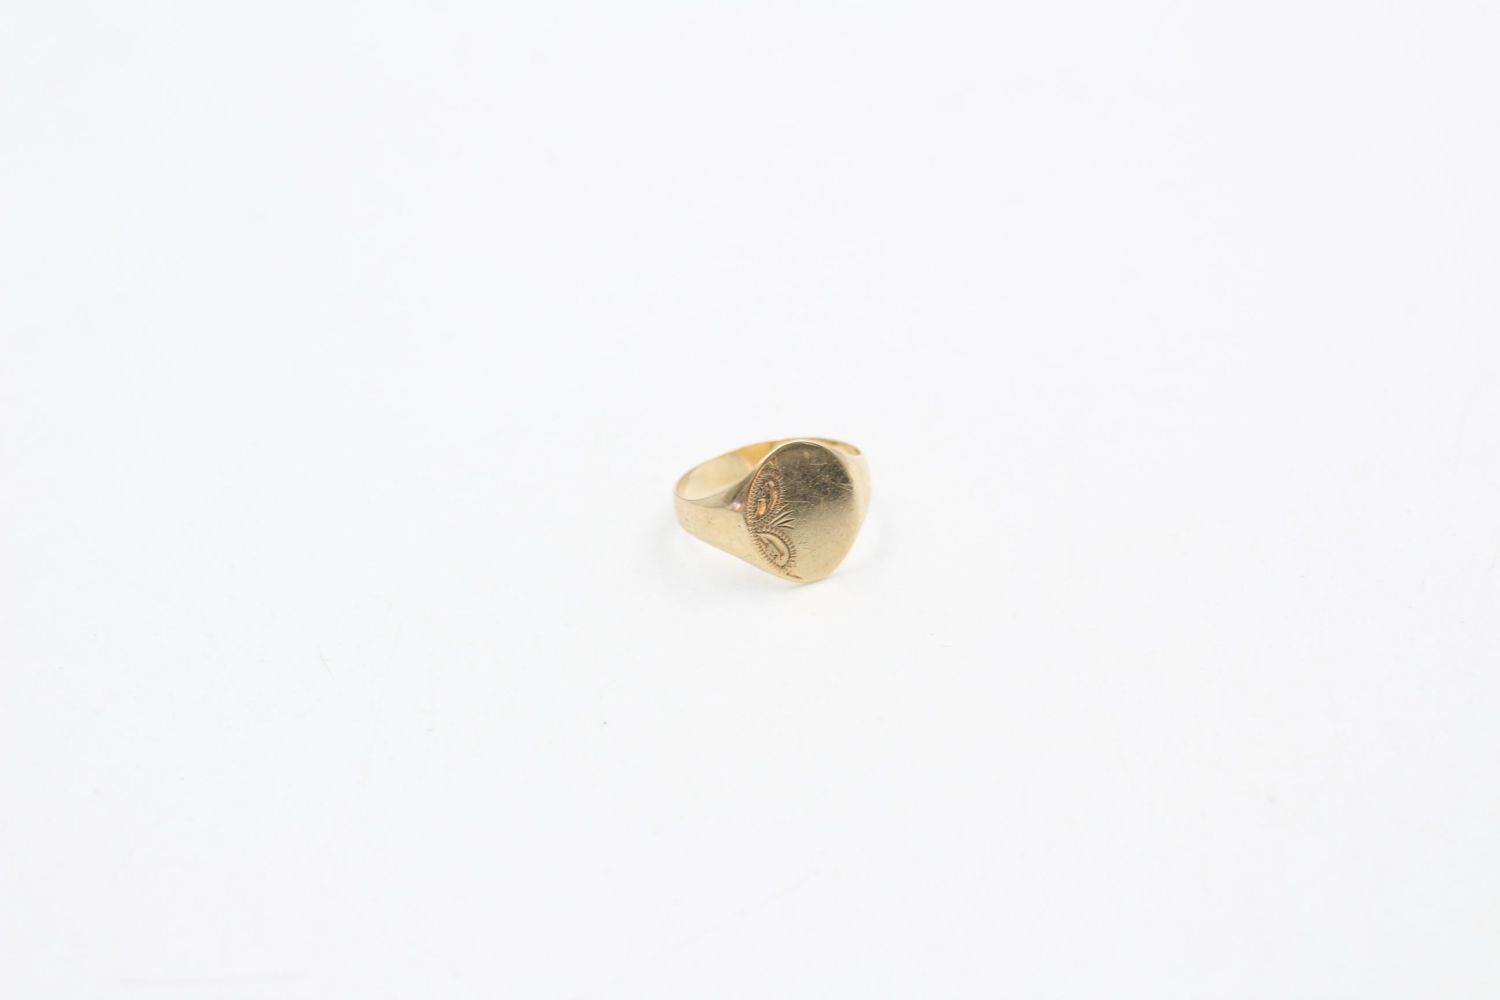 9ct Gold engraved oval signet ring 2.8 grams gross - Image 2 of 5